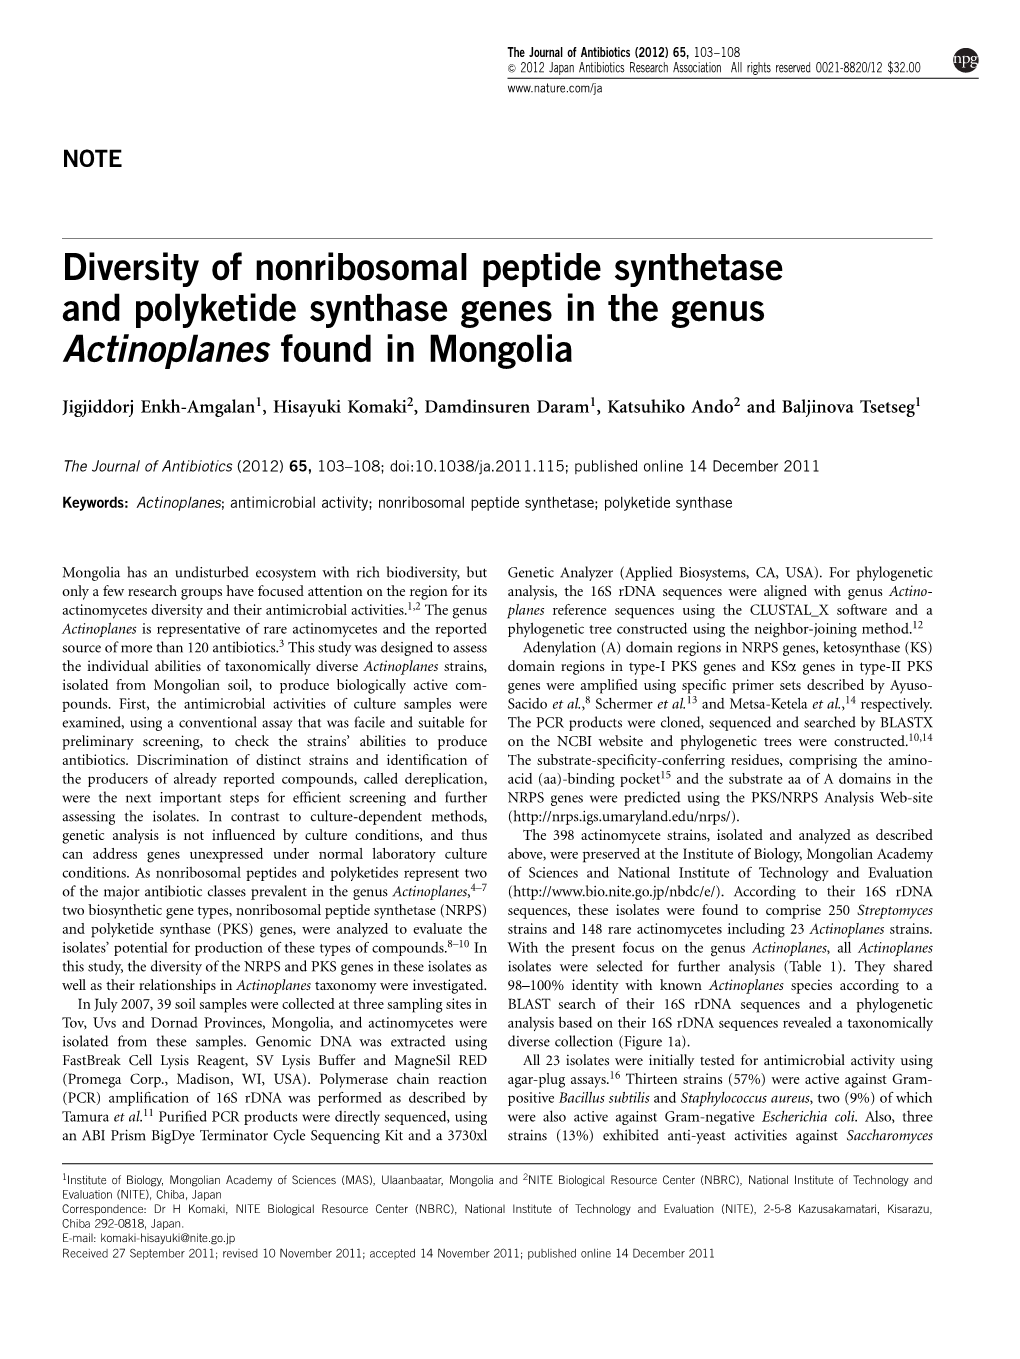 Diversity of Nonribosomal Peptide Synthetase and Polyketide Synthase Genes in the Genus Actinoplanes Foundinmongolia